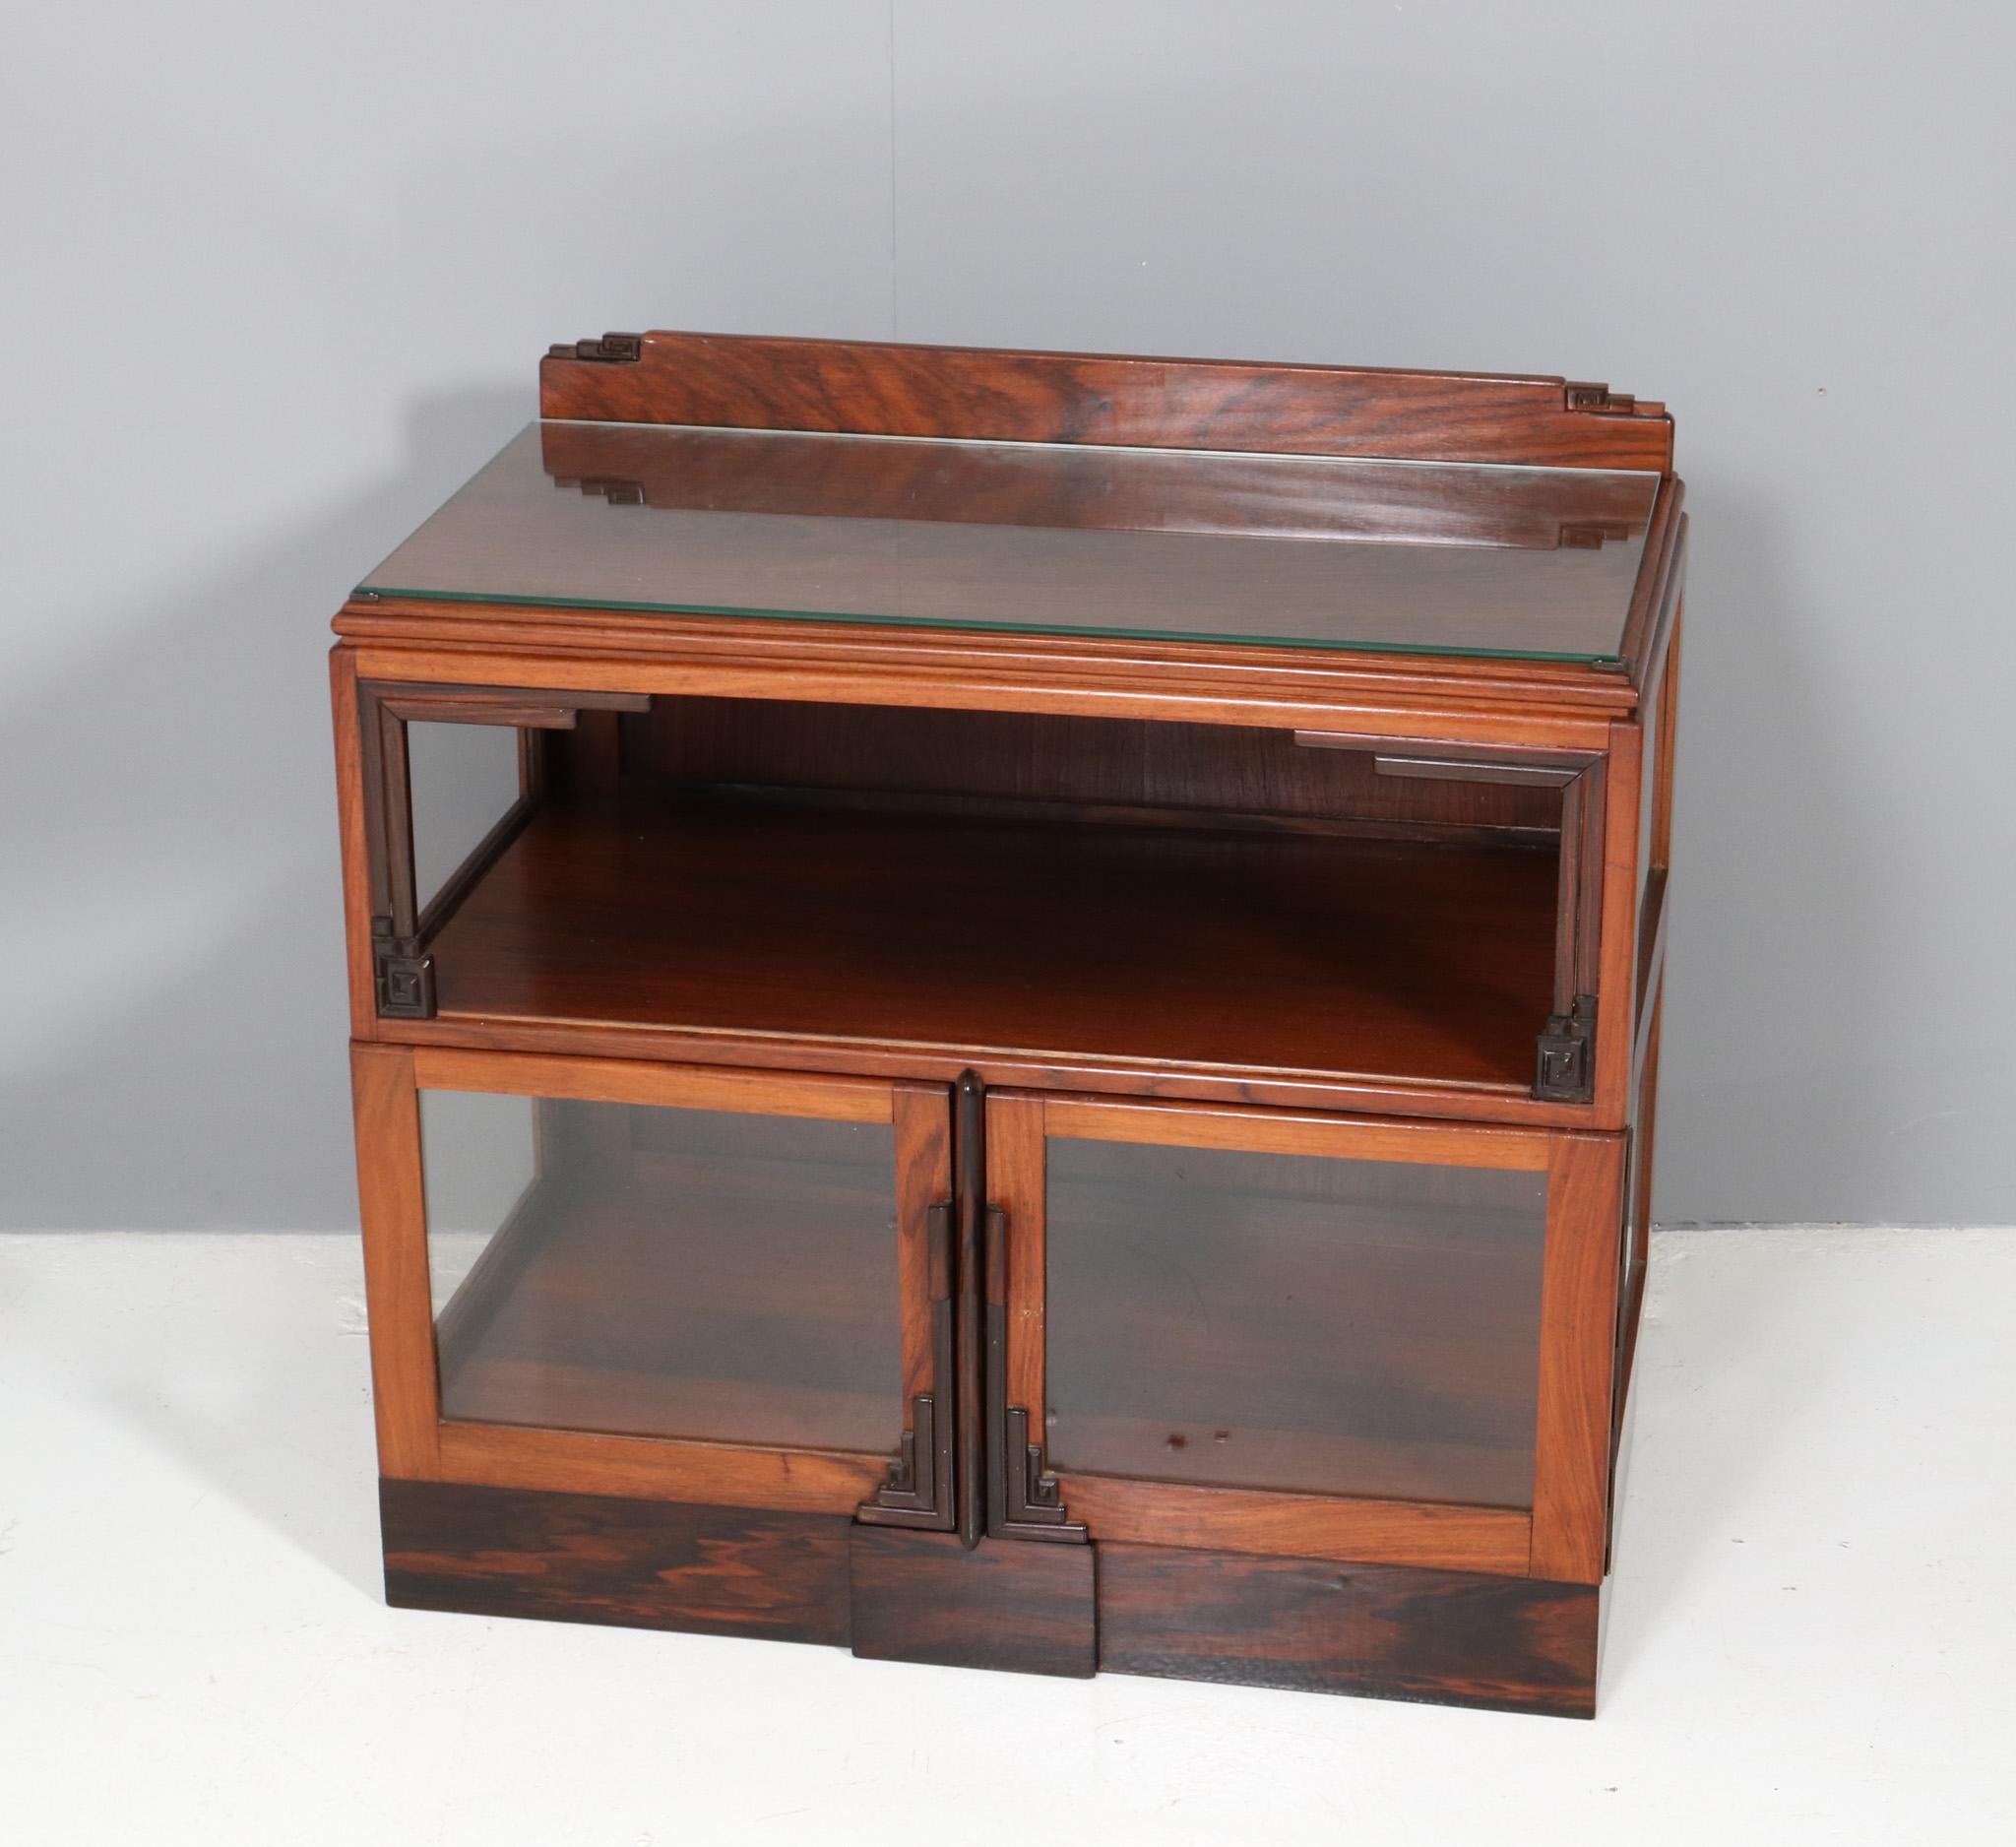 Magnificent and rare Art Deco Amsterdamse School tea cabinet.
Striking Dutch design from the 1920s.
Solid padouk with decorative macassar ebony elements.
The original veneered padouk top has a glass top to protect the veneer.
This wonderful Art Deco